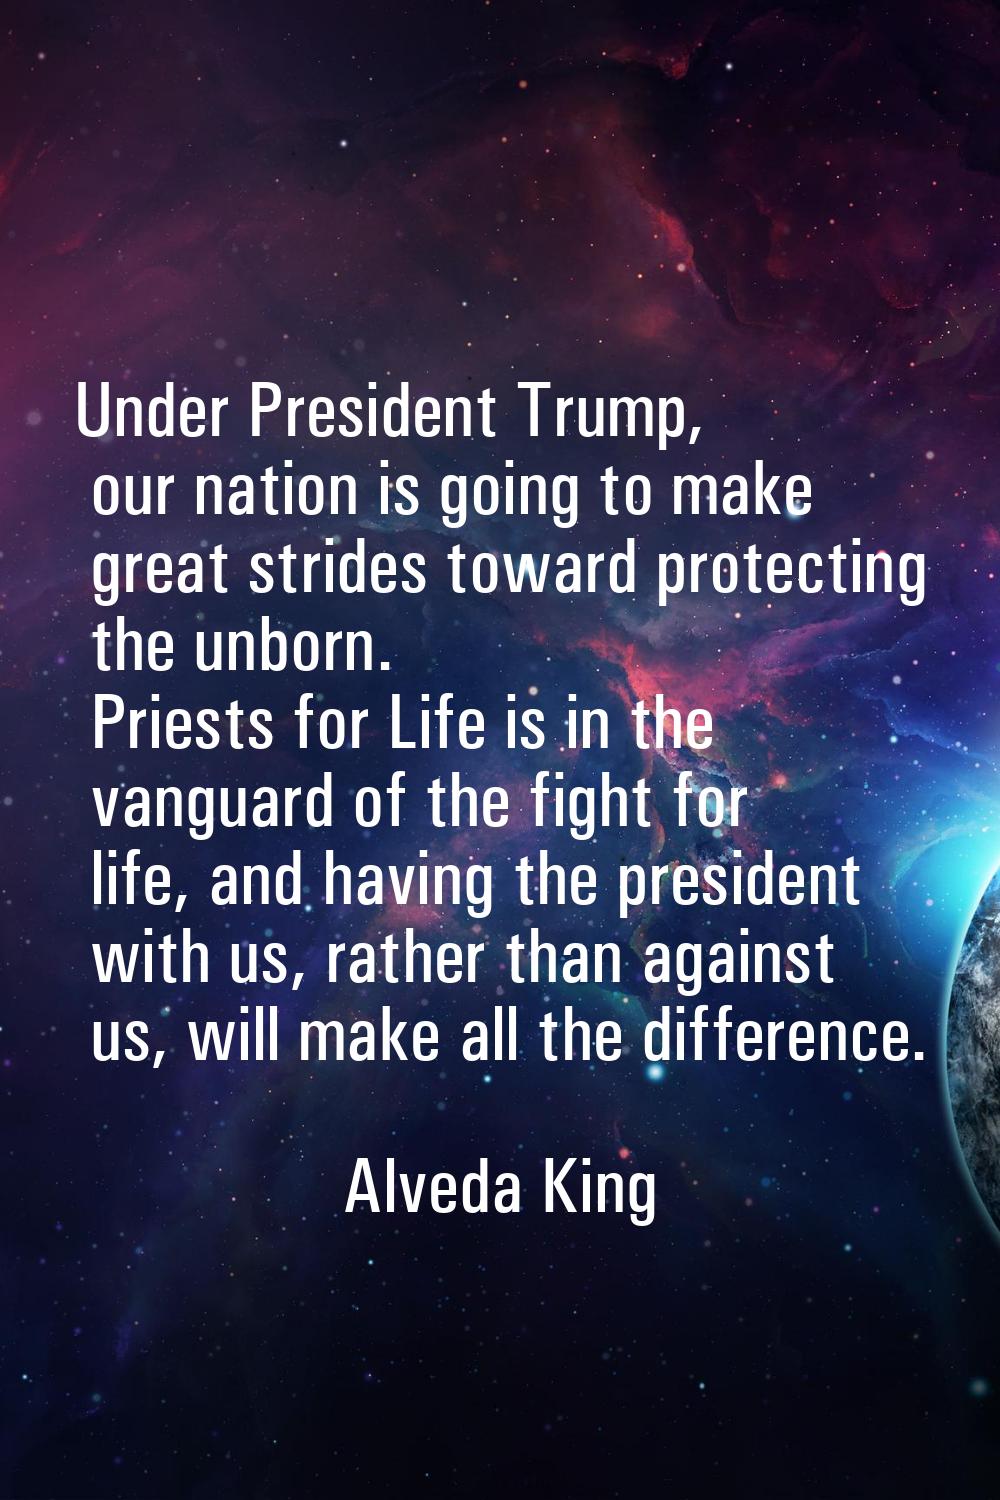 Under President Trump, our nation is going to make great strides toward protecting the unborn. Prie